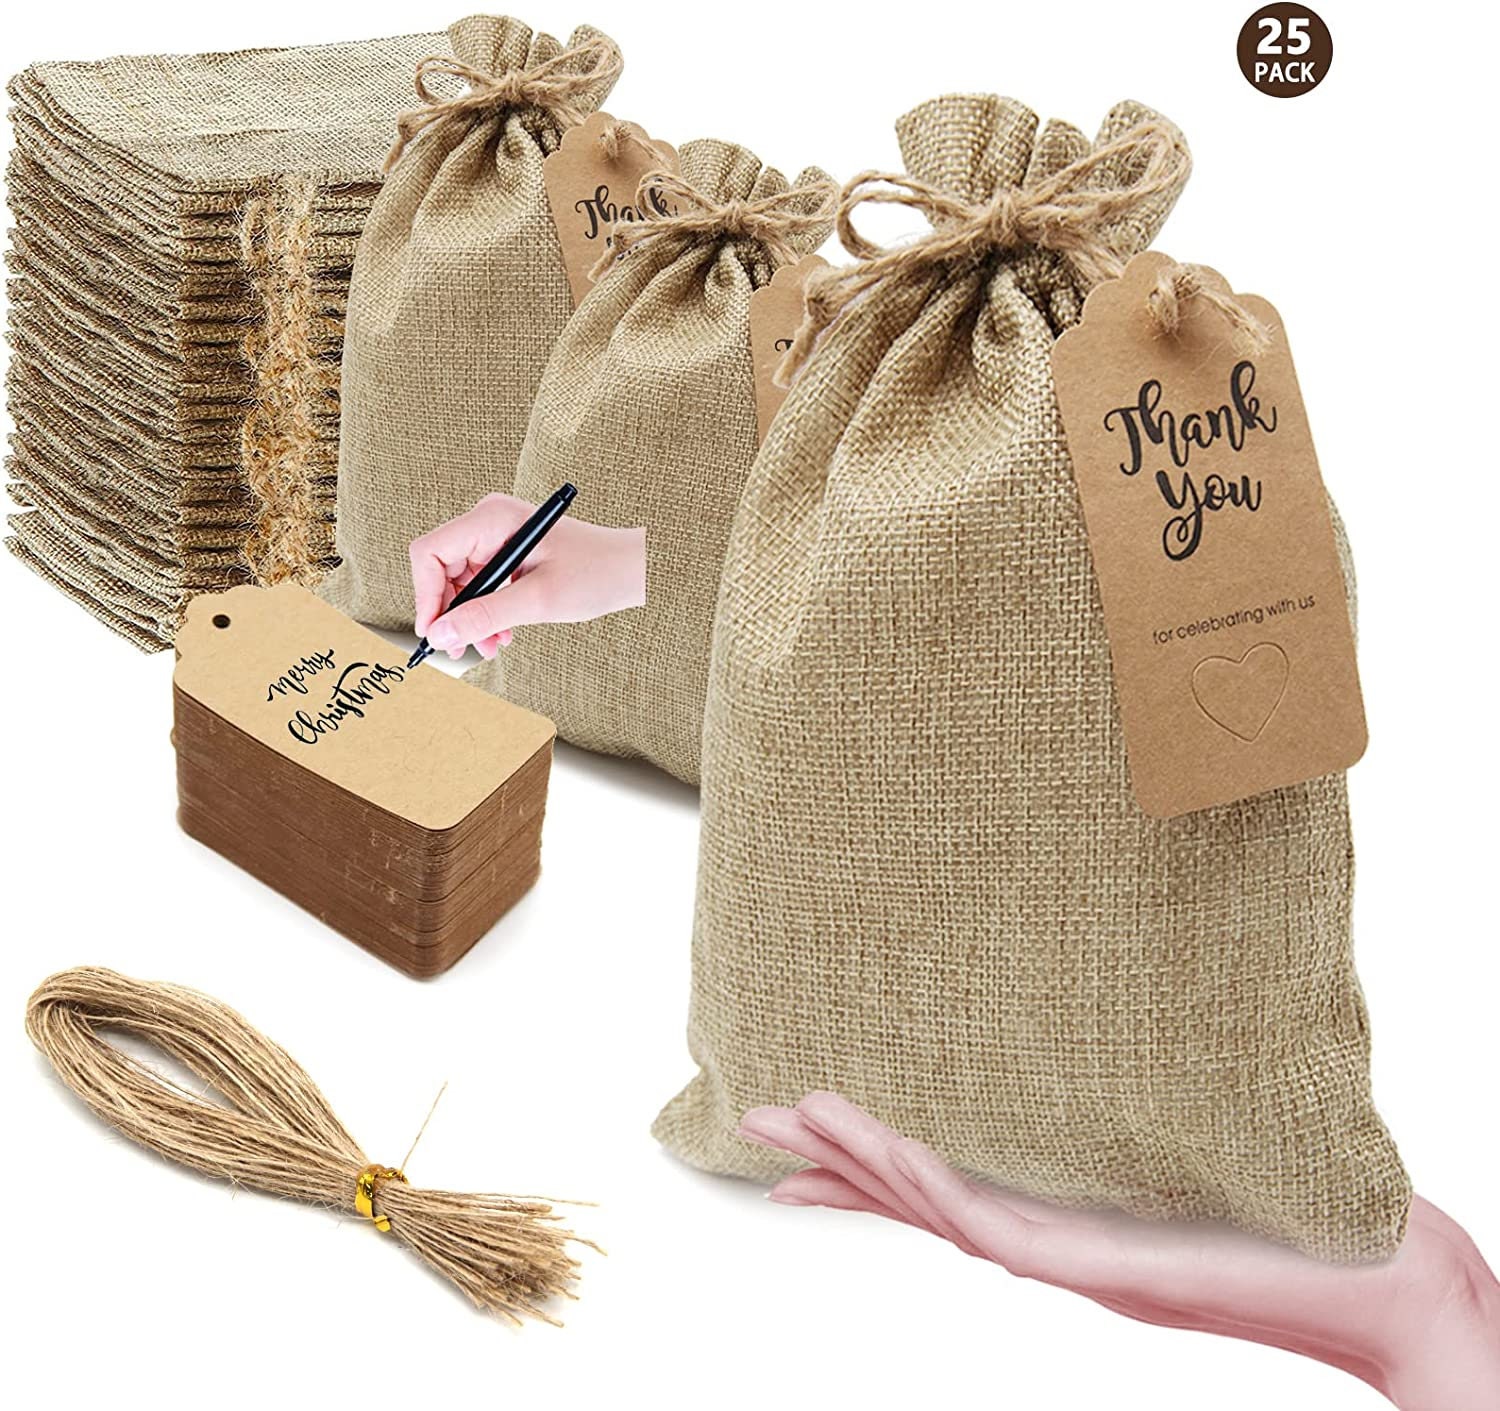 50x Burlap Bags with Drawstring by Kona Kift 5x75 Small Party Favor Gift  Bags  Bonus Gift Tags  String Brown Bags Bulk Small Size for Birthday  Bag Craft Bags Or Party